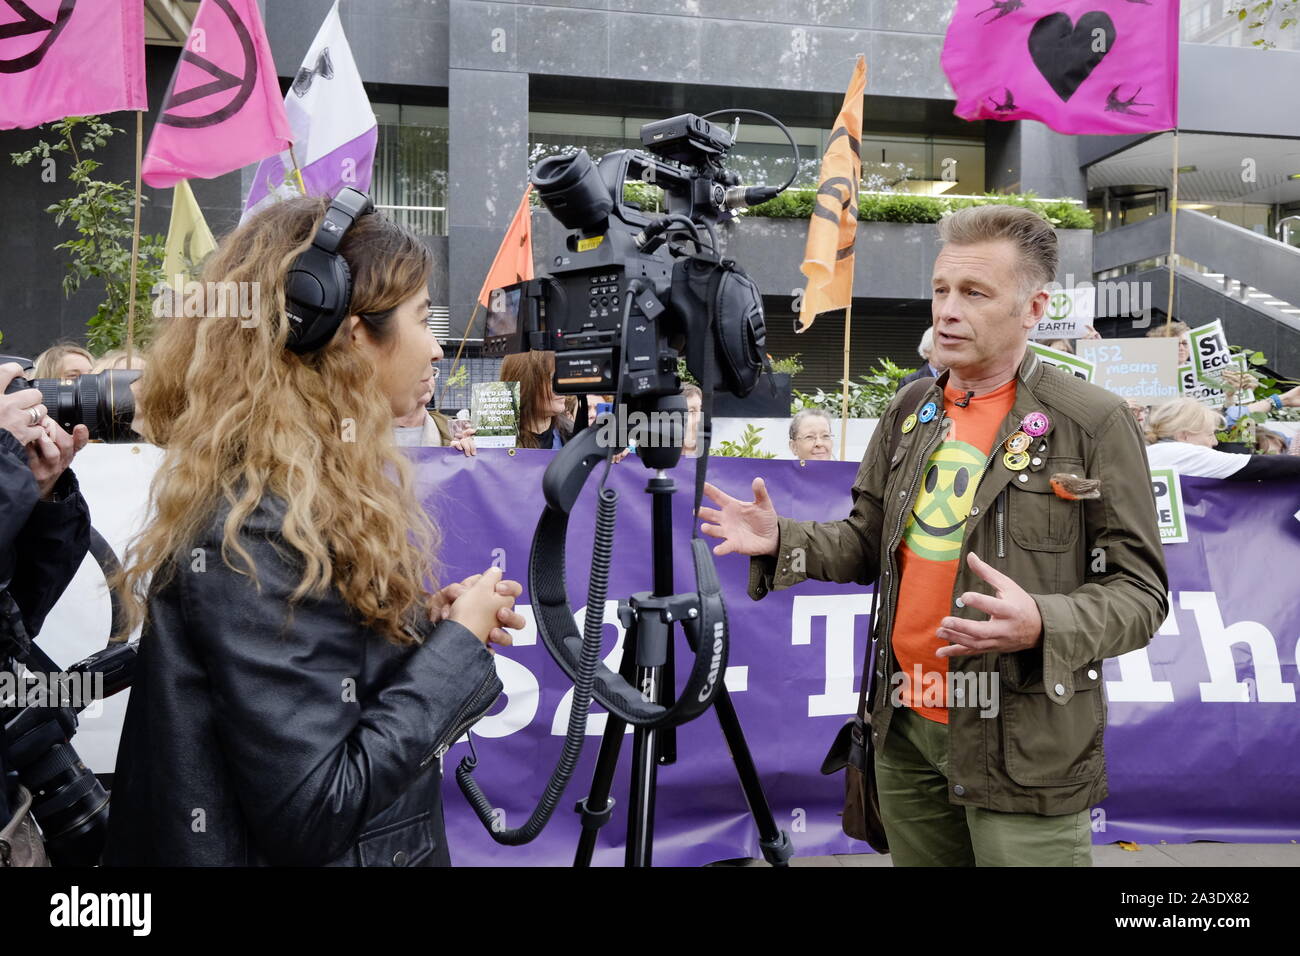 Naturalist and TV presenter Chris Packham heads up a demo outside the HQ of Network Rail, Euston, to prevent the destruction of ancient woodlands along the new proposed HS2 rail link between London, Birmingham, Manchester and Leeds. These include South Cubbington Woods in Warwickshire, which is well know its bluebells, biodiversity and public walks. The banner behind him says 'Tell The Truth' one of Extinction Rebellion's demands. One protester holds a poster saying 'Stop Ecocide'. Chris Packham was also recorded talking for TV. A young protester joined him in sharing a handful of Acorns. Stock Photo